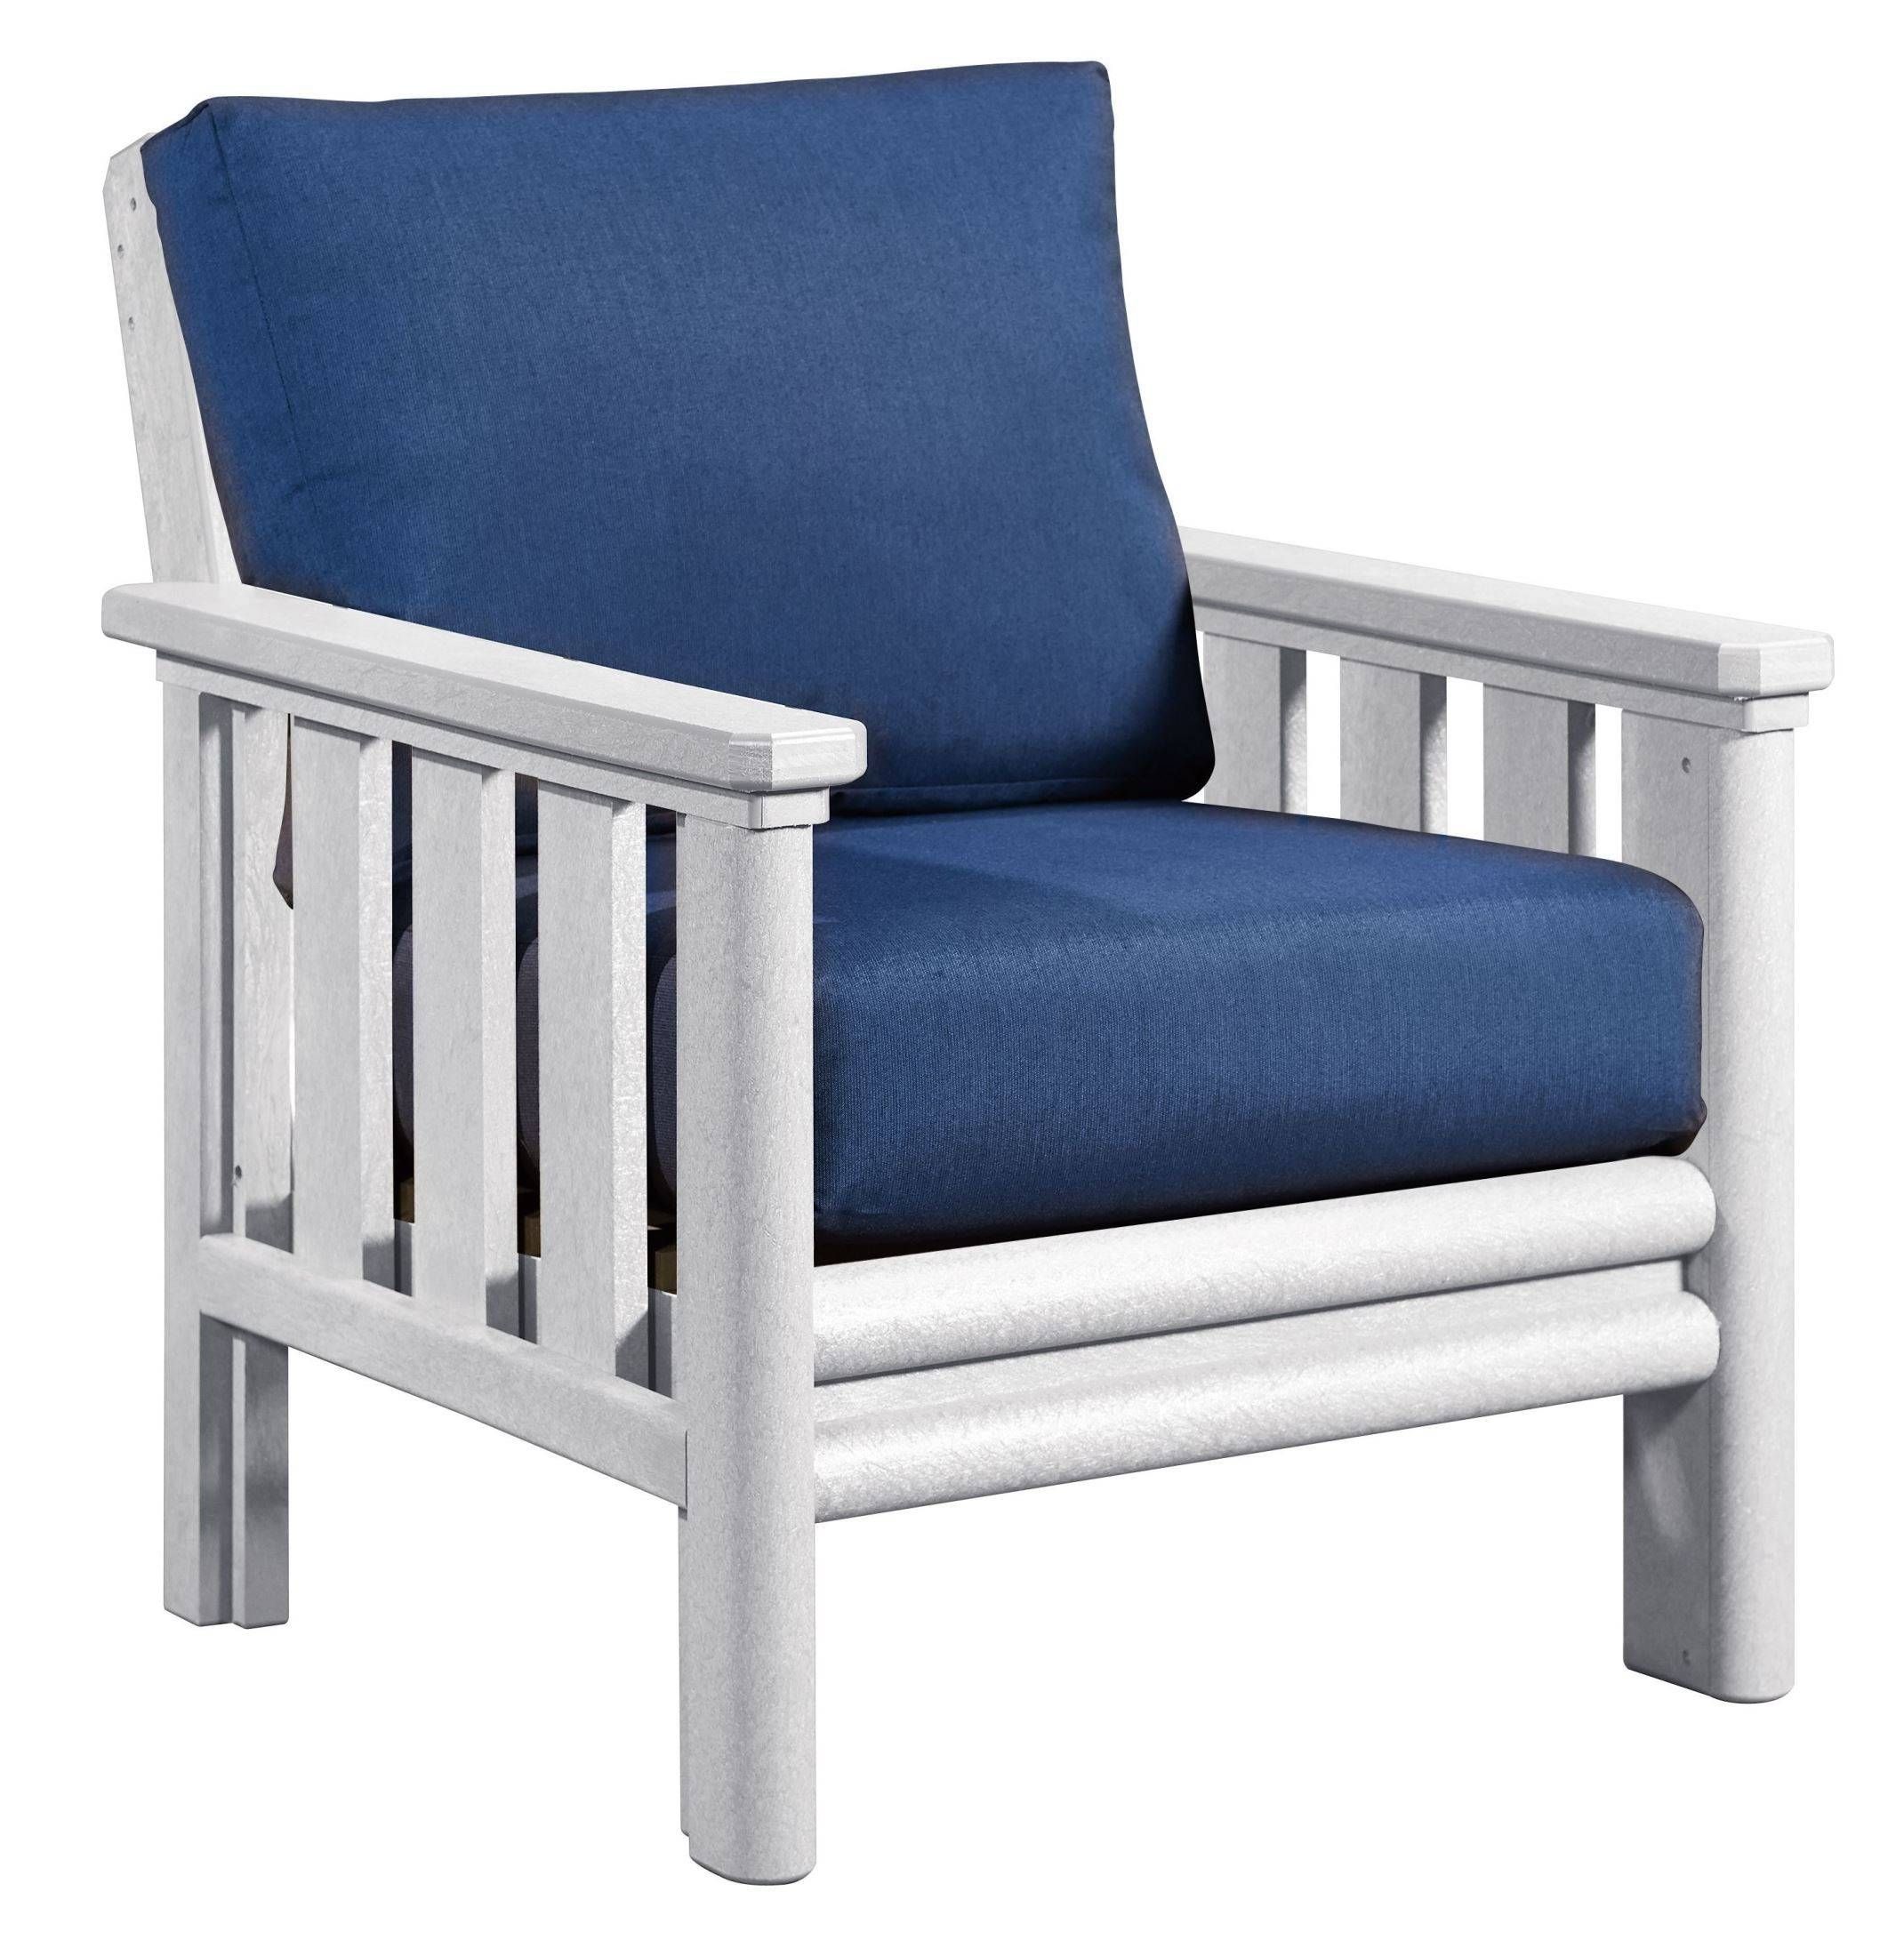 Stratford White Chair With Indigo Blue Sunbrella Cushions From Cr For Stratford Sofas (View 27 of 30)